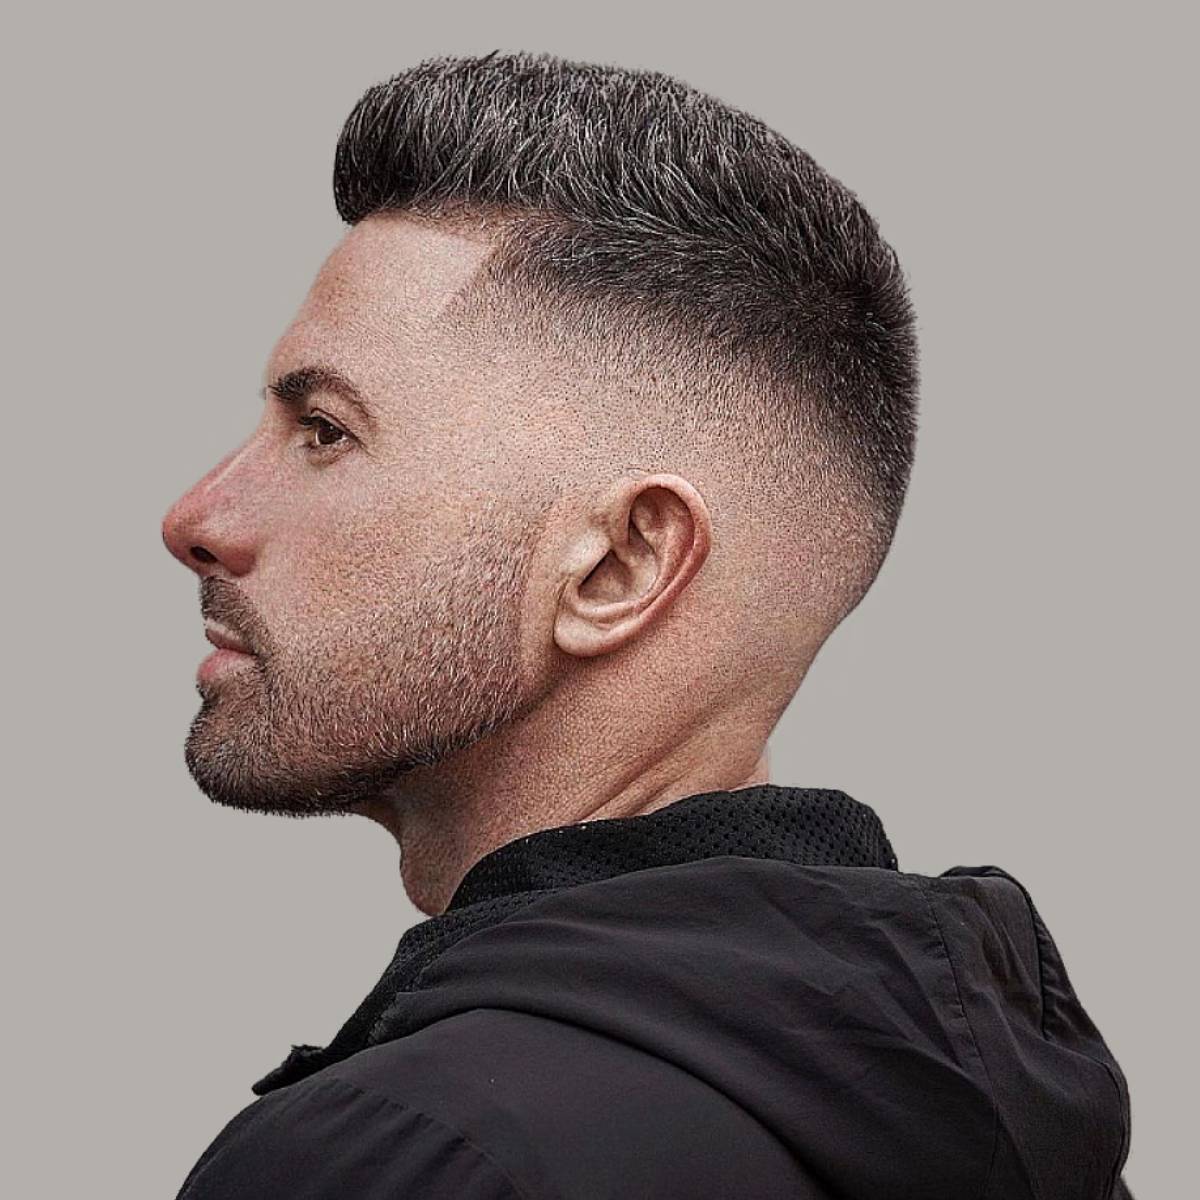 50 Trending Short Hairstyles  Haircuts for Men in 2023